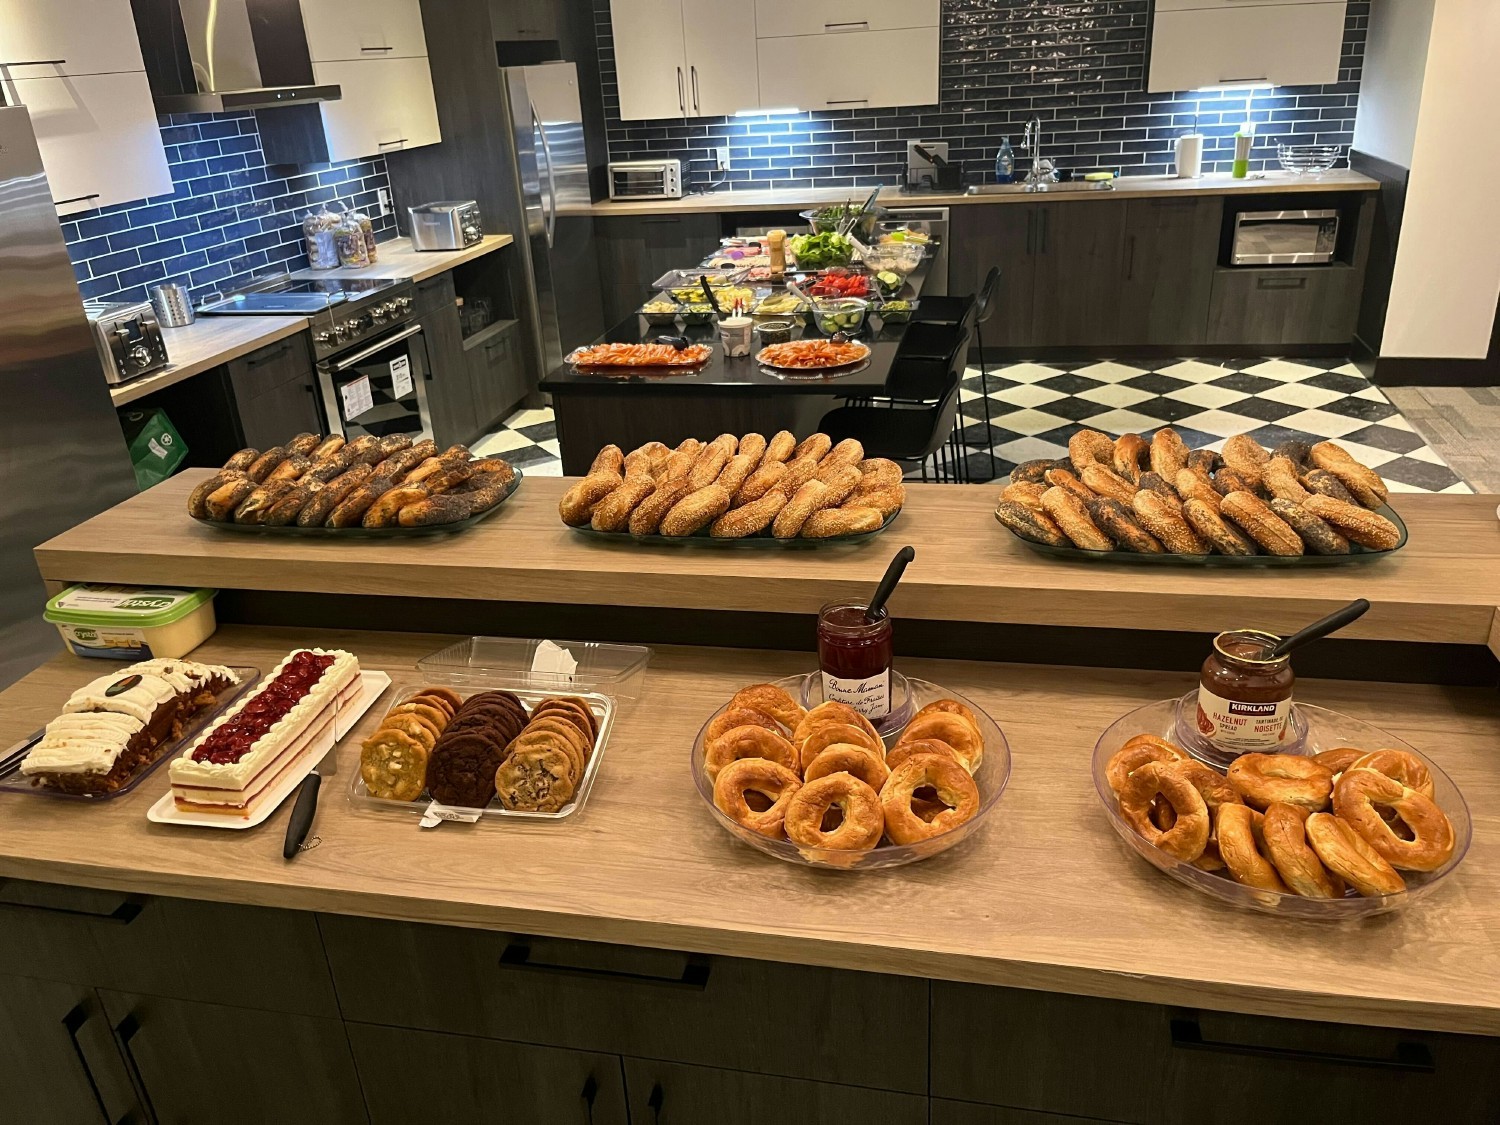 Bagels day in the renovated kitchen.